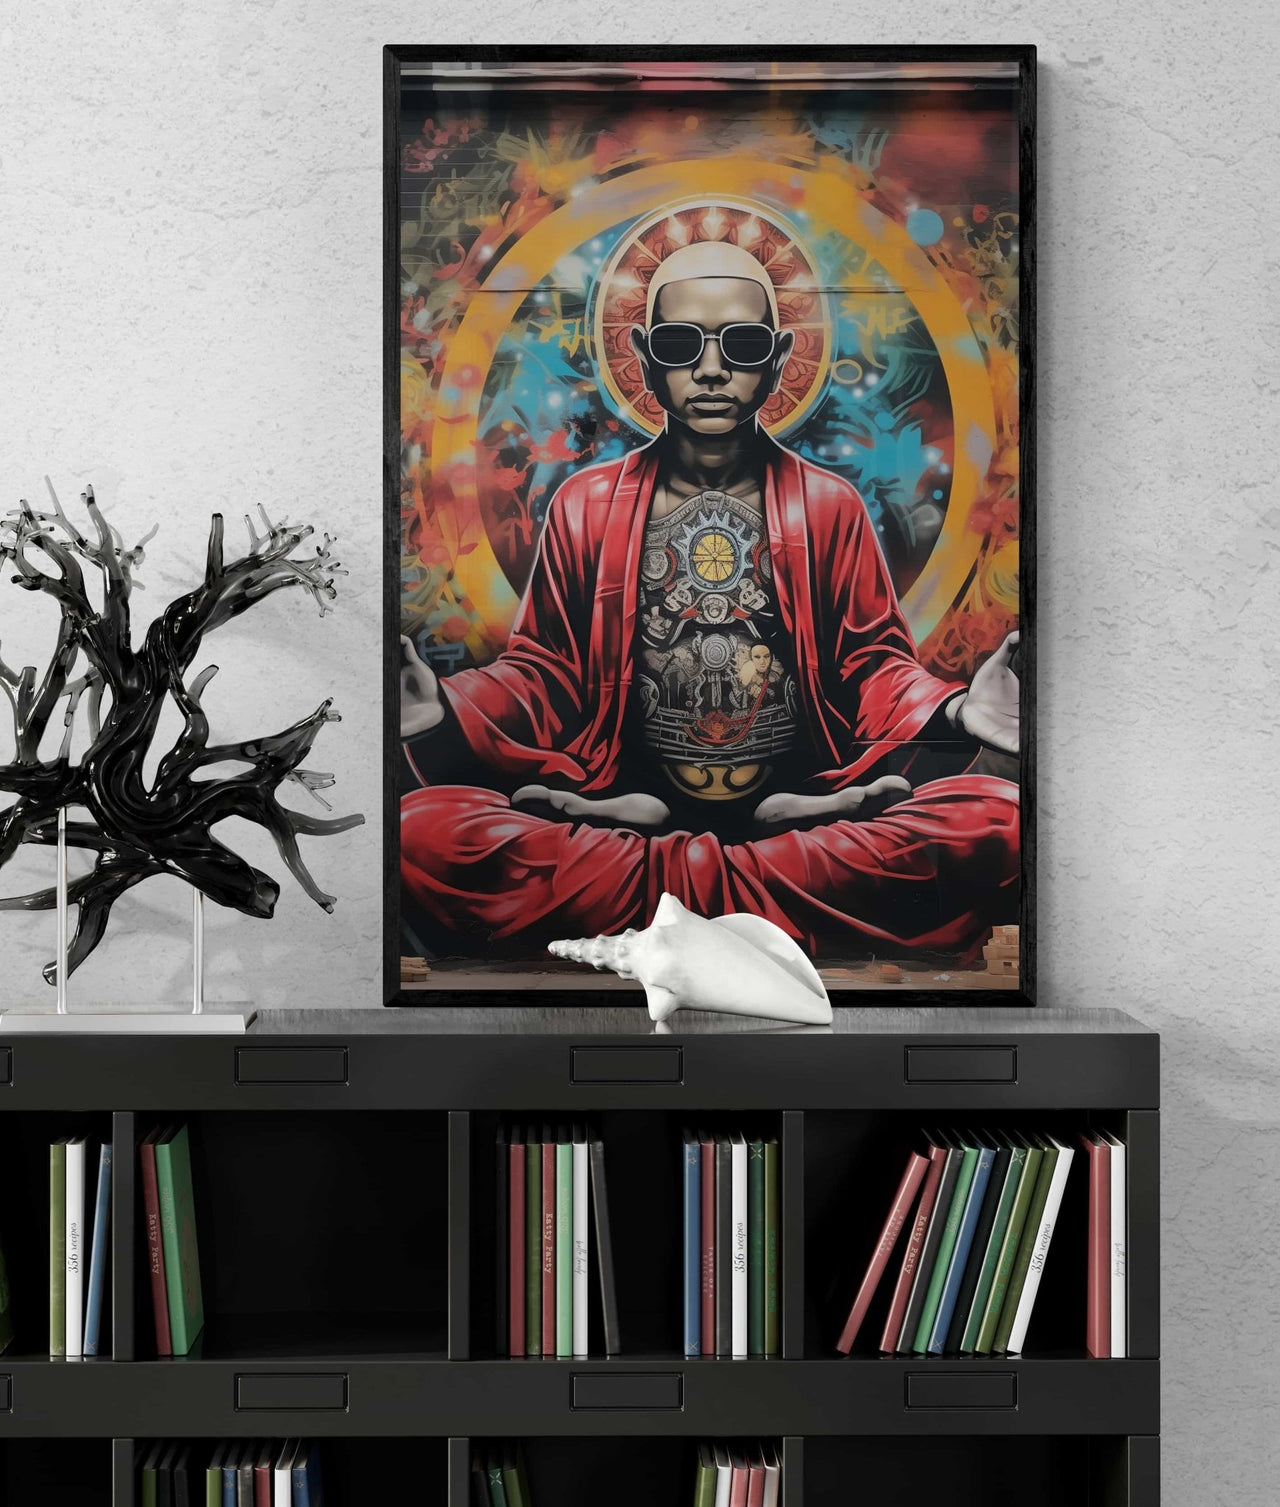 Framed canvas print from Milton Wes Art, depicting a serene, meditative figure in red, with intricate spiritual motifs, set against an energetic, abstract halo, enhancing the contemplative atmosphere of the room